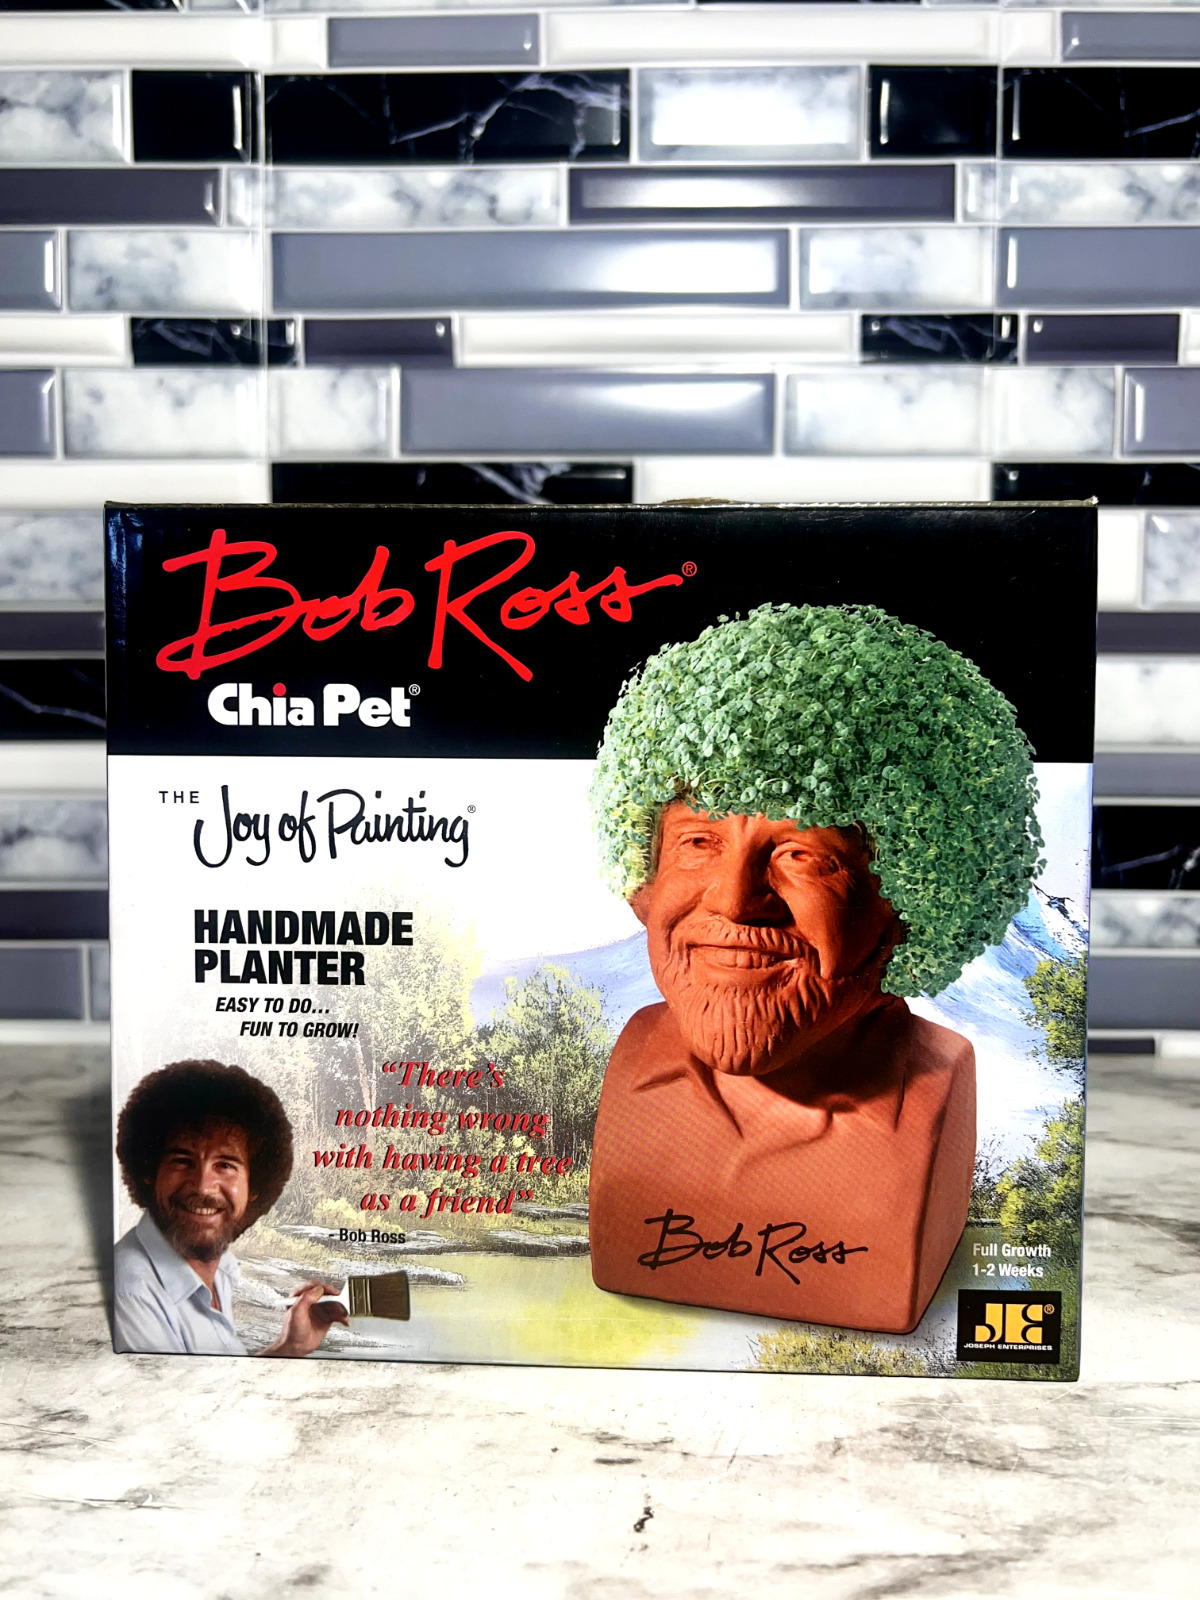 Bob Ross Signature Chia Pet The Joy of Painting Pottery Planter NEW IN BOX